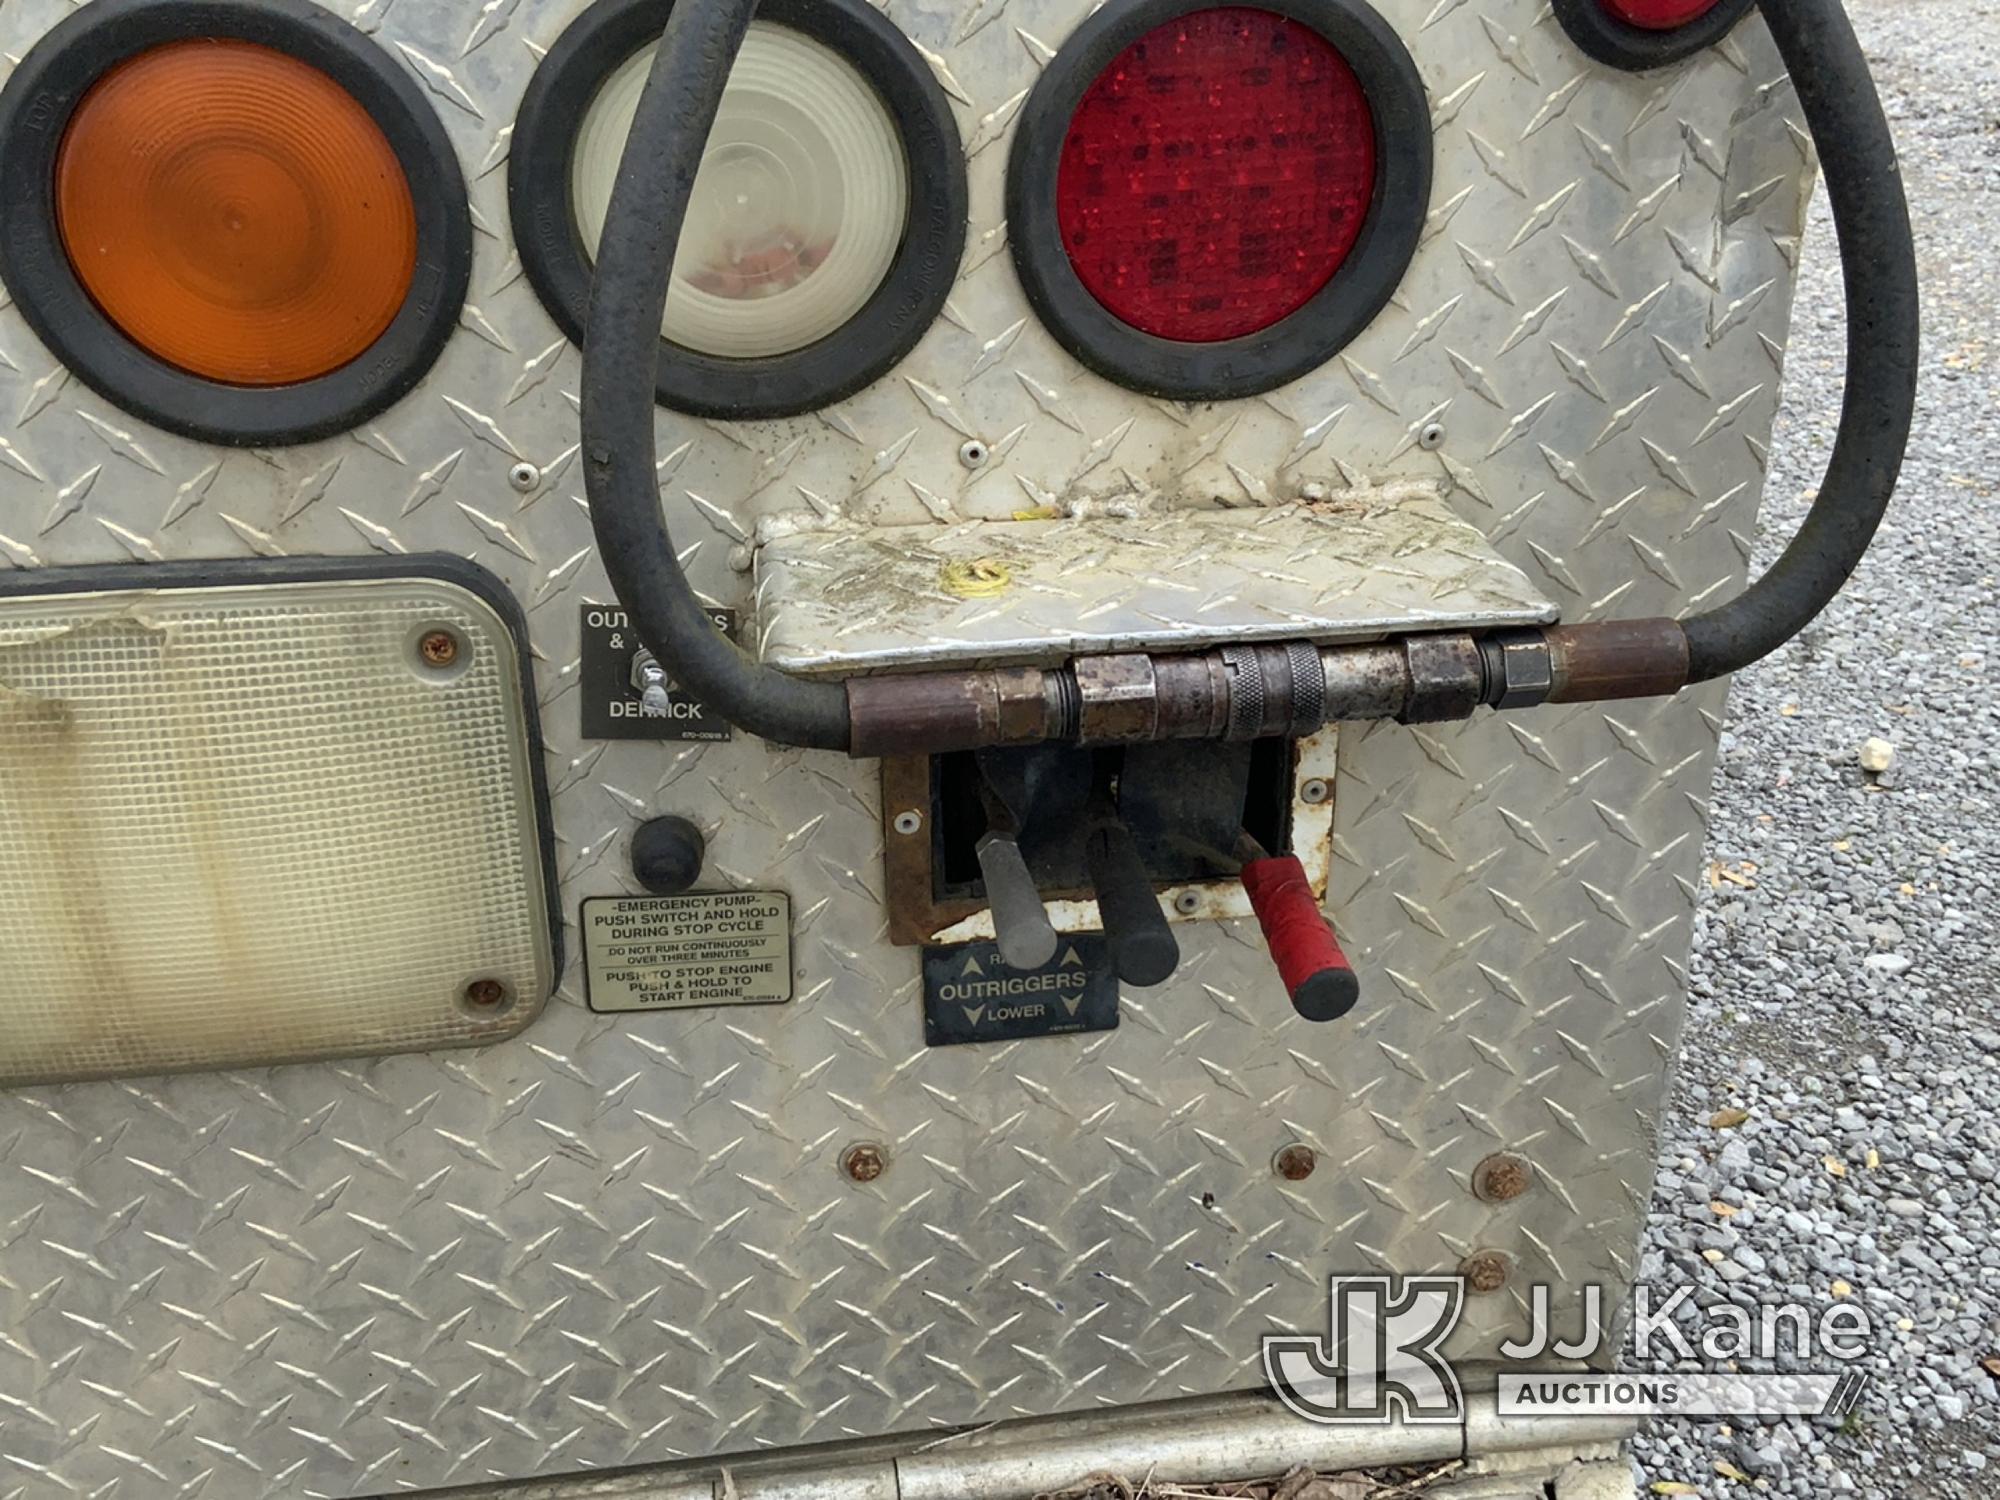 (Clay, KY) Altec DL45-BR, Digger Derrick rear mounted on 2006 International 4400 Utility Truck Not R